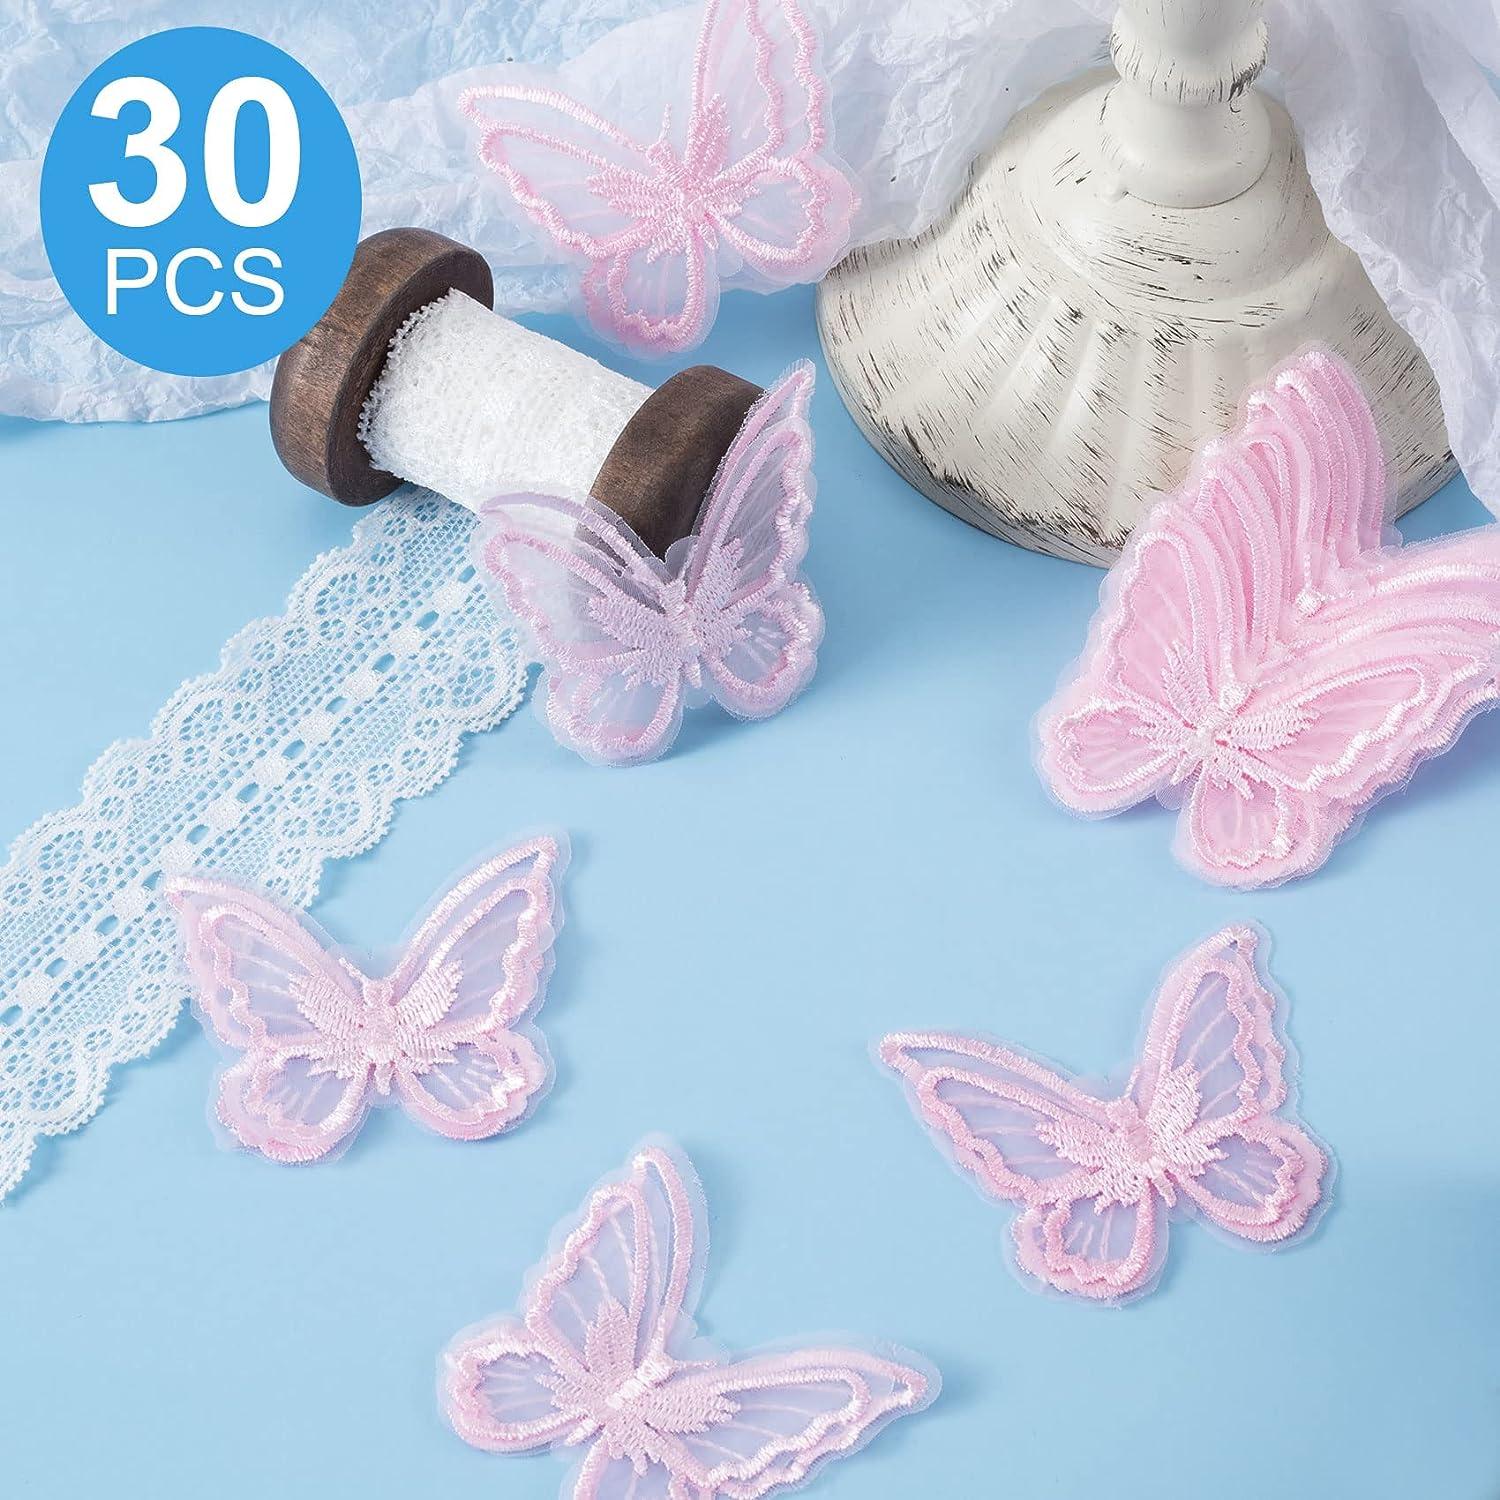  30 Pcs Pink Lace Butterfly Applique Embroidery,Organza